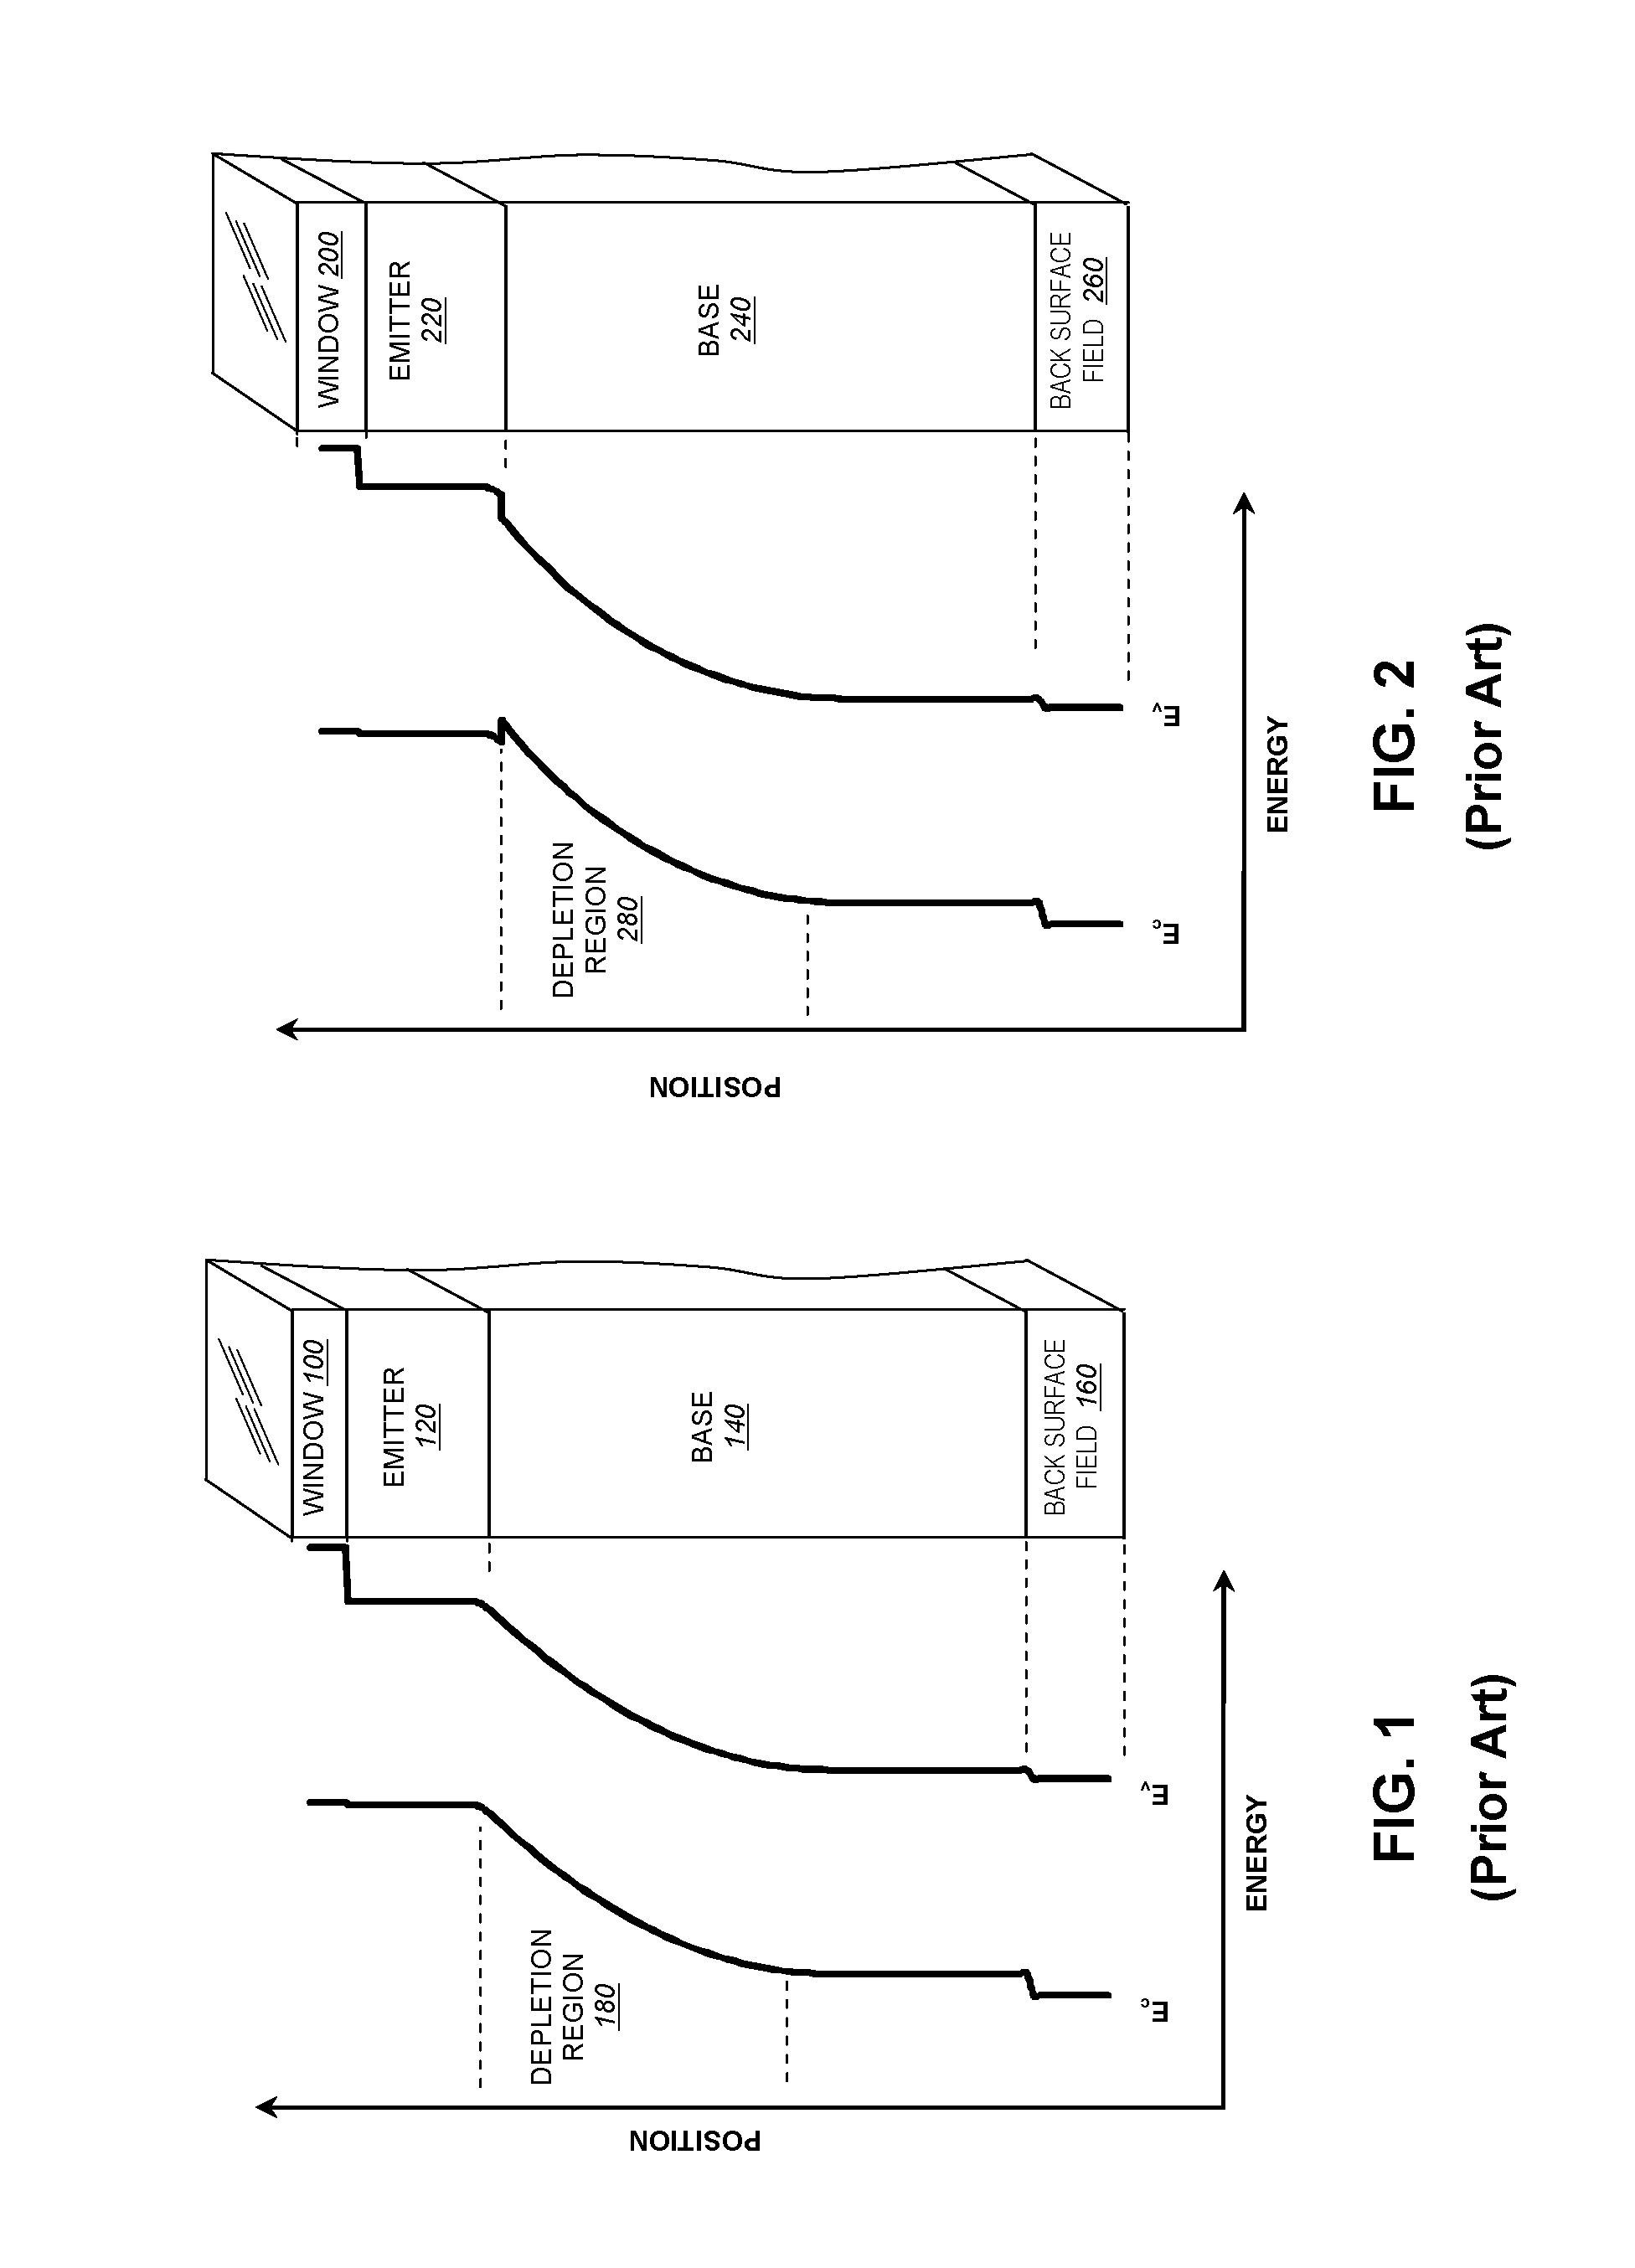 Multijunction solar cell employing extended heterojunction and step graded antireflection structures and methods for constructing the same